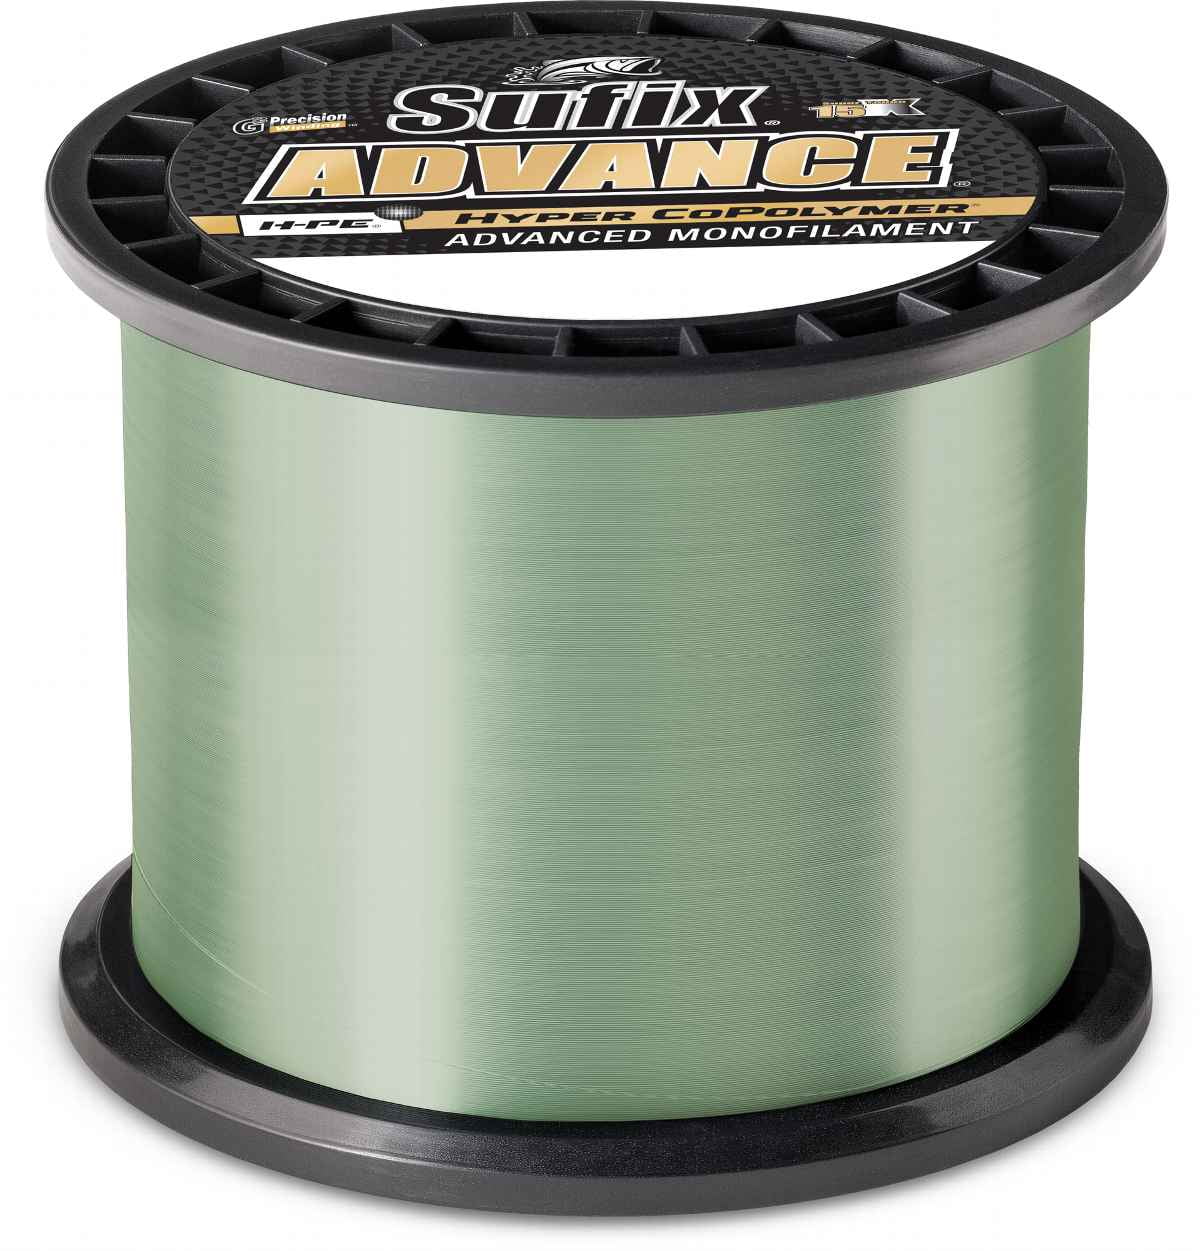 Stren Original Monofilament fishing line clear color 330 yards Choose  weight!